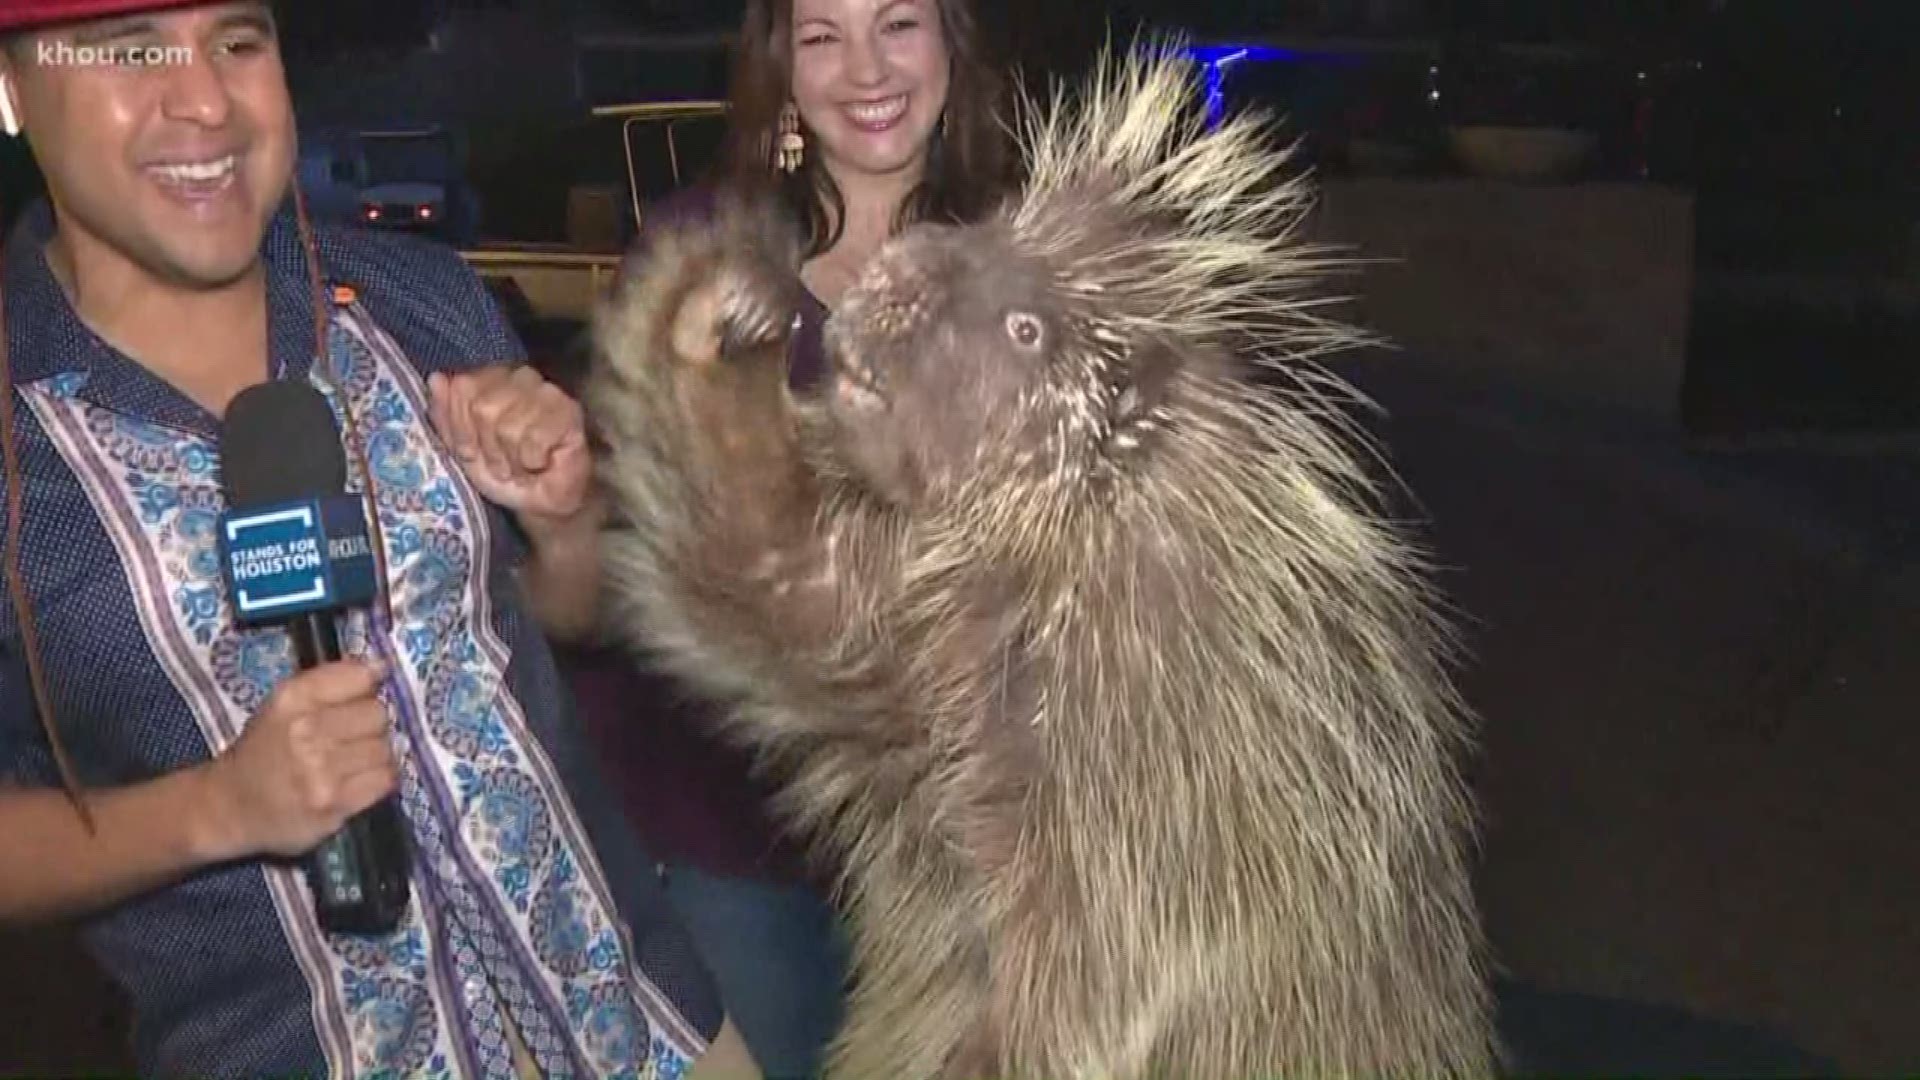 This porcupine has skills when it comes to greeting visitors coming to the Houston Zoo for Zoo Lights.